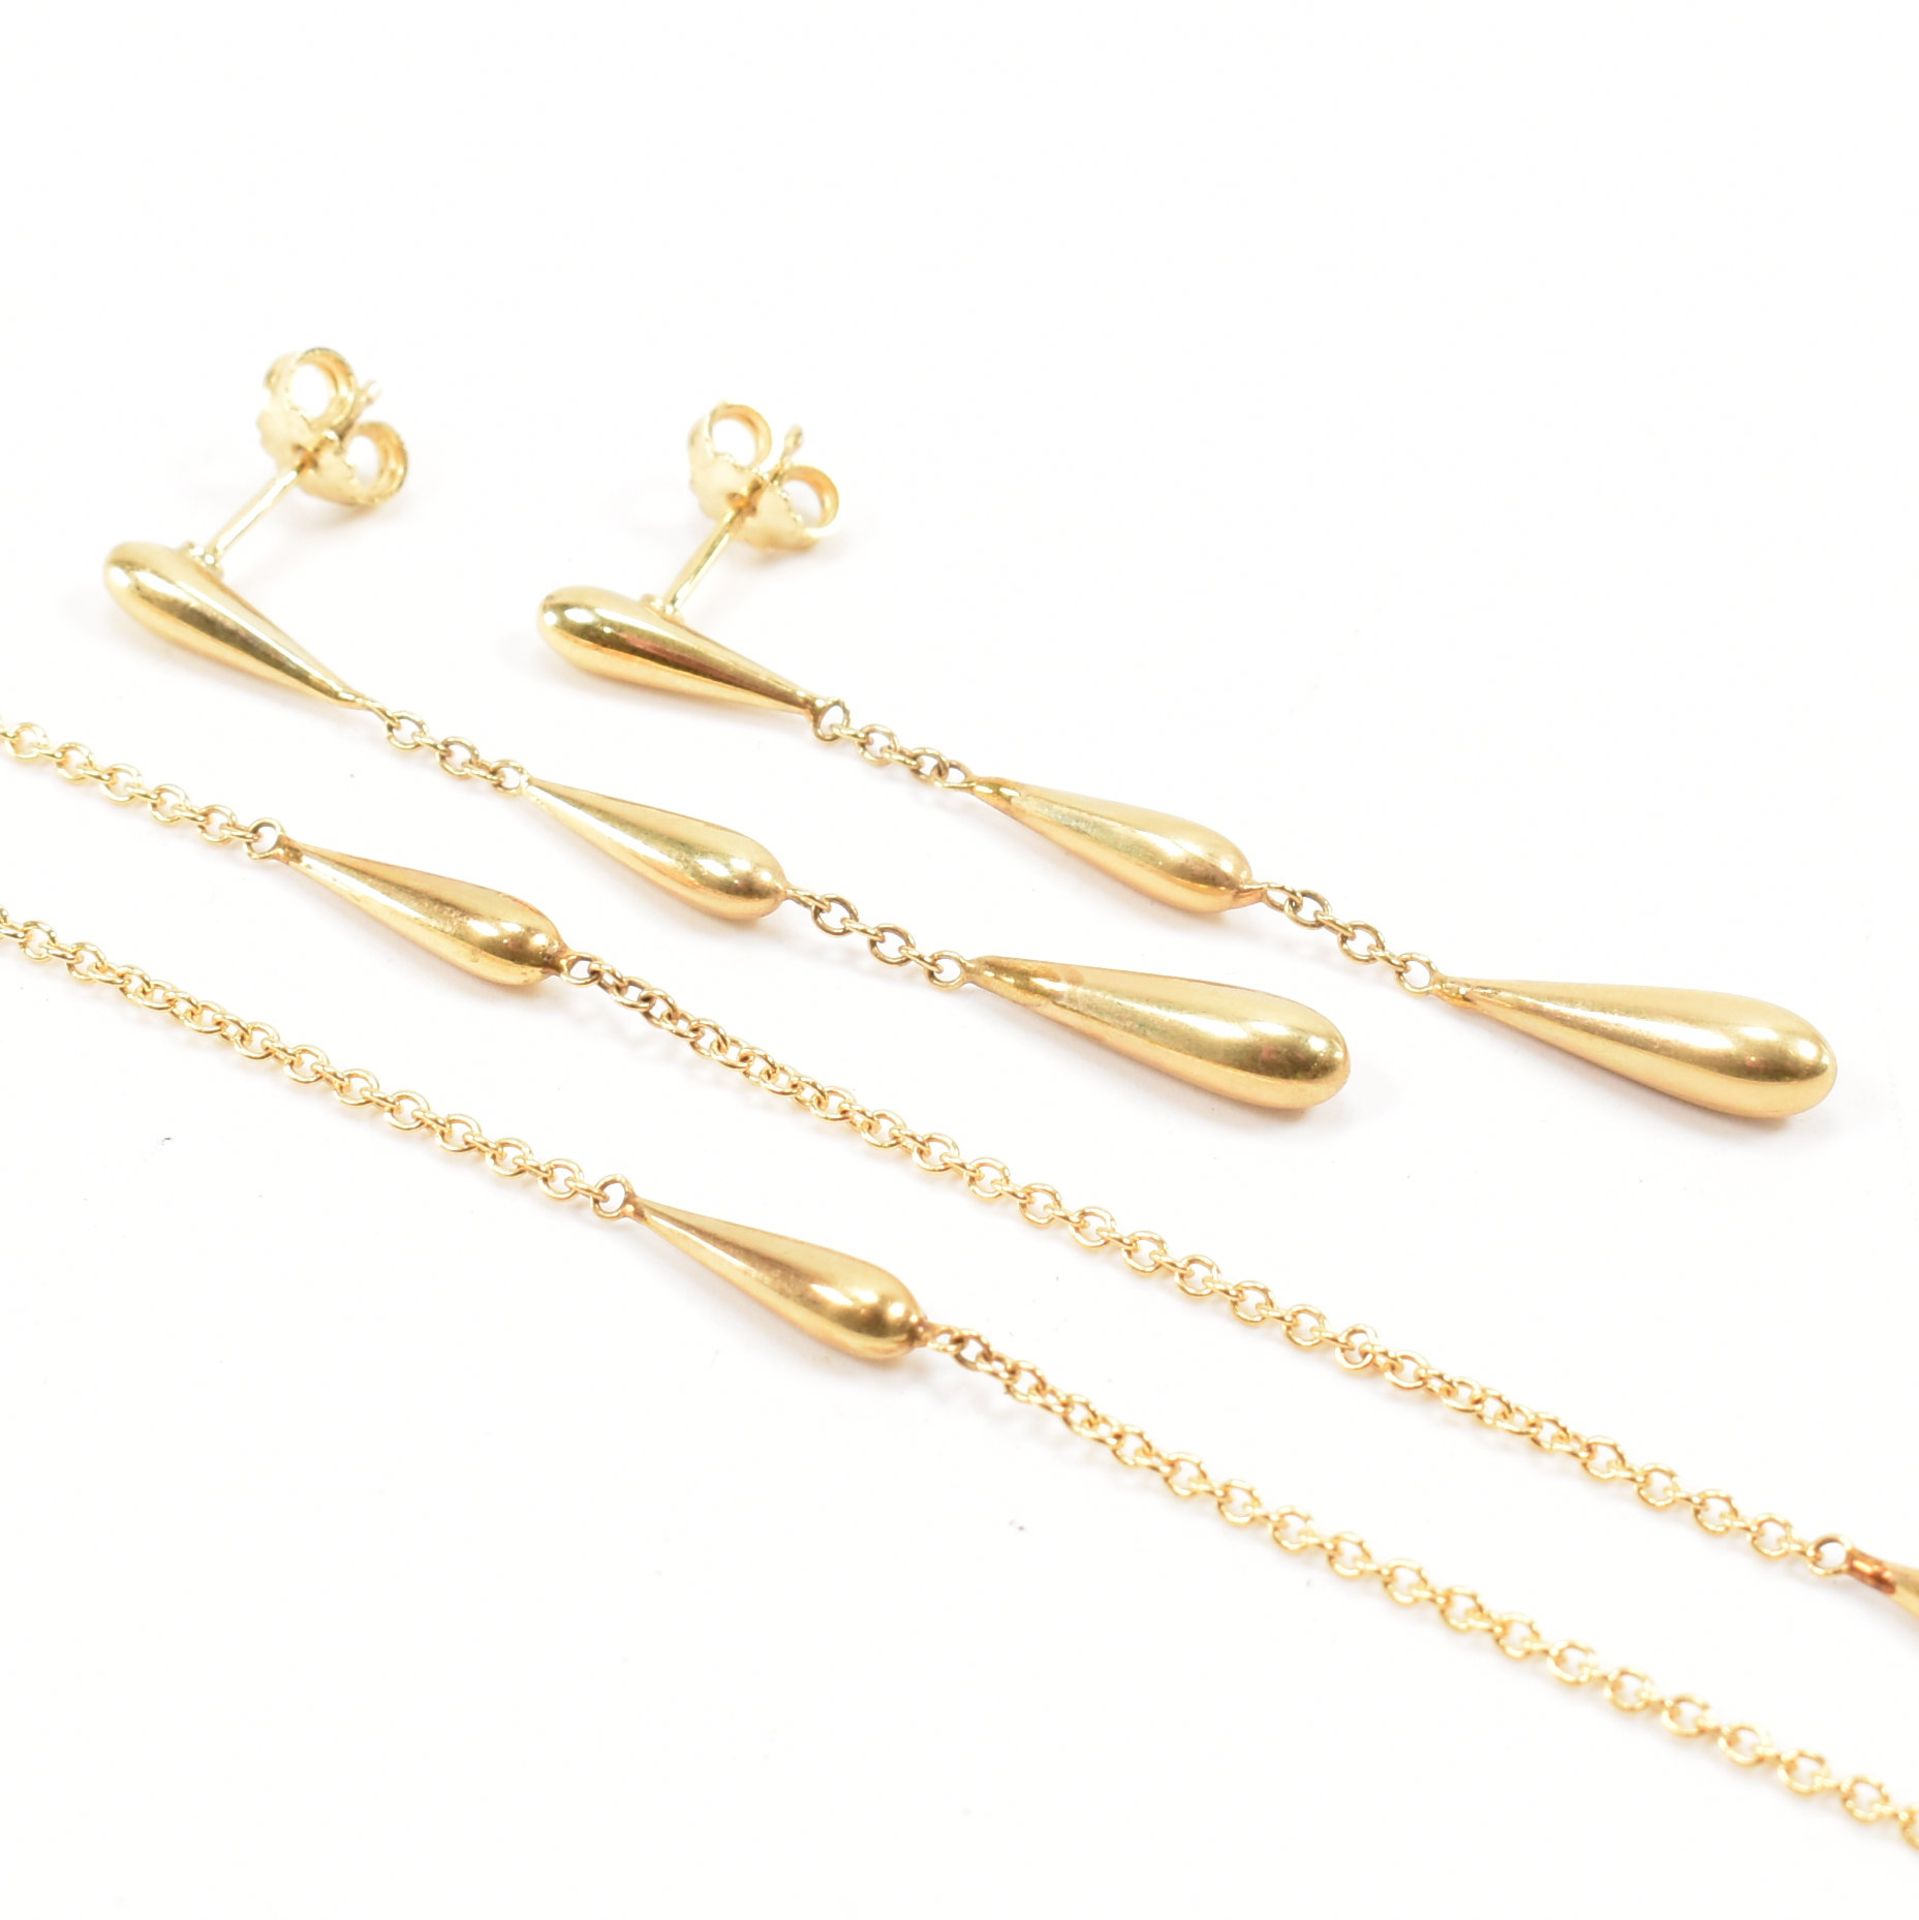 HALLMARKED 9CT GOLD NECKLACE & EARRING SUITE - Image 3 of 5